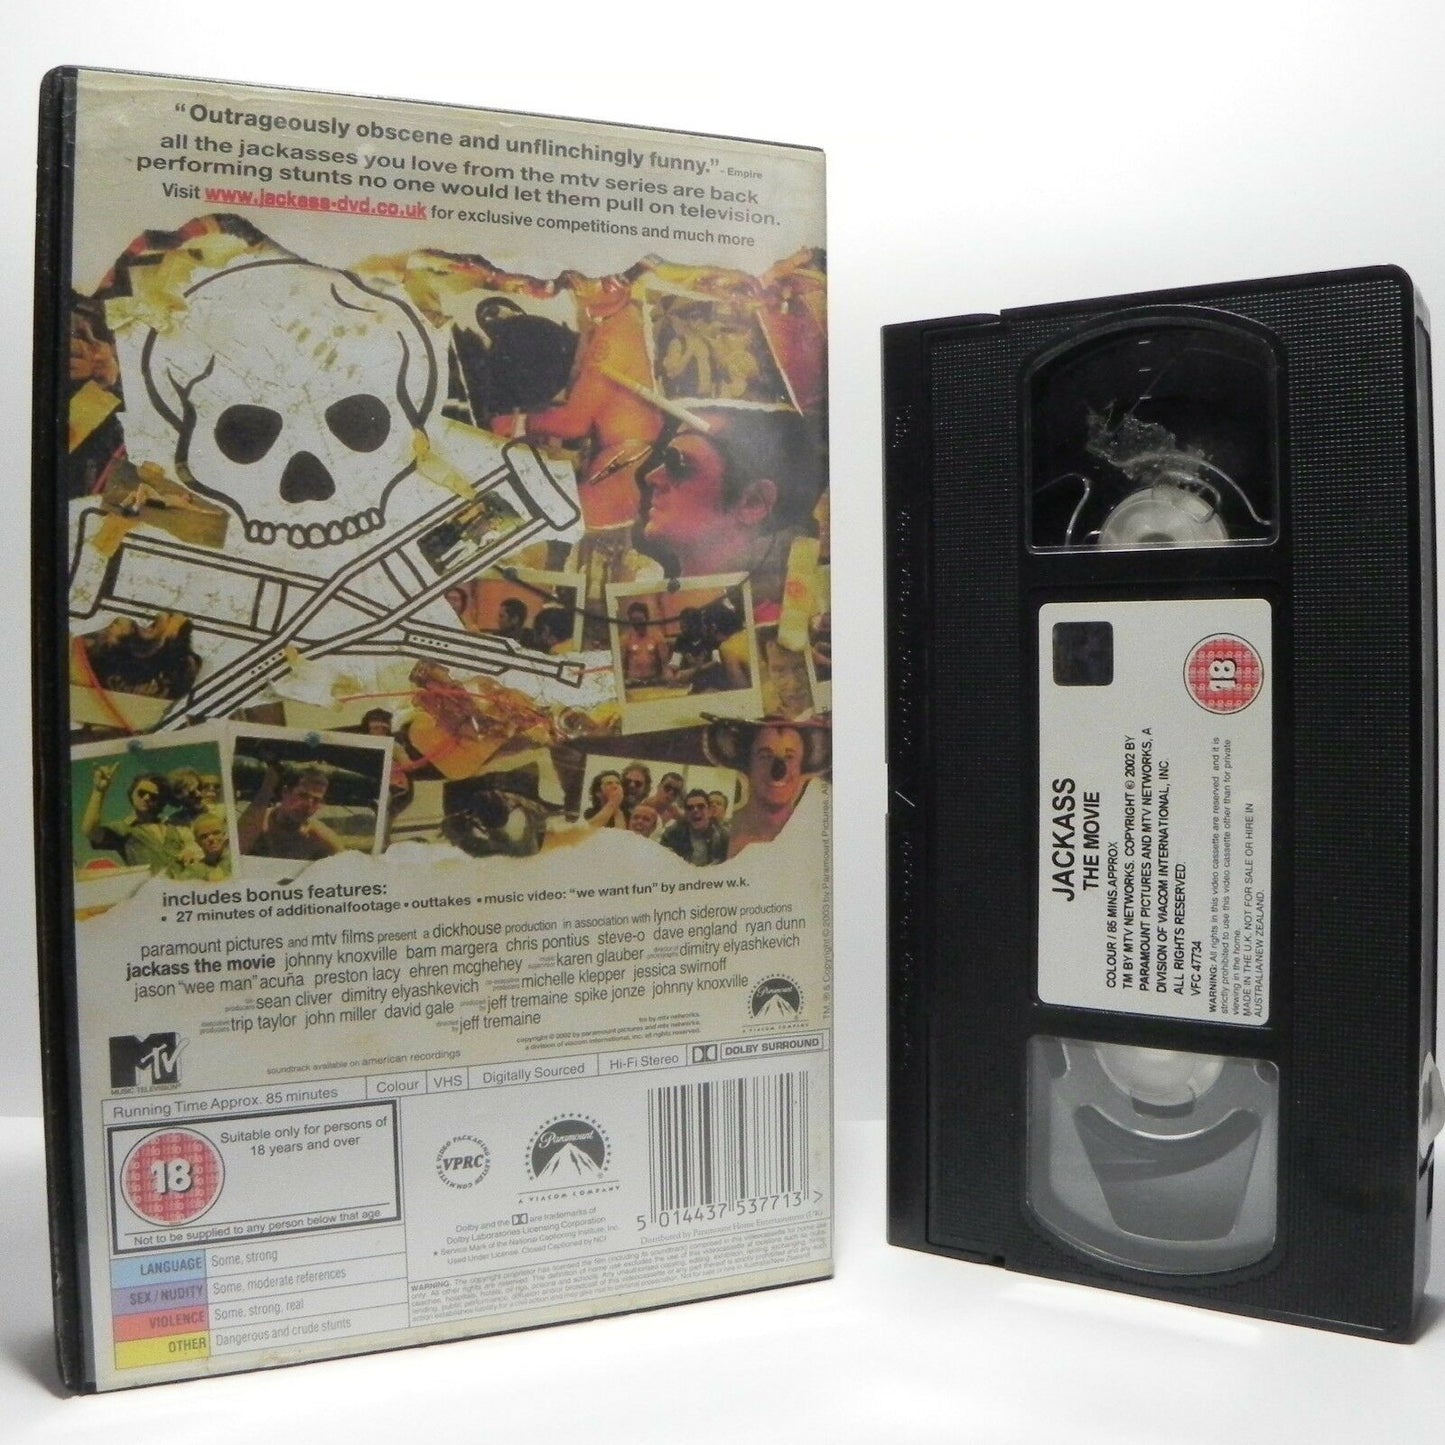 Jackass: The Movie - Special Edition - Large Box - J.Knoxville/B.Margera - VHS-